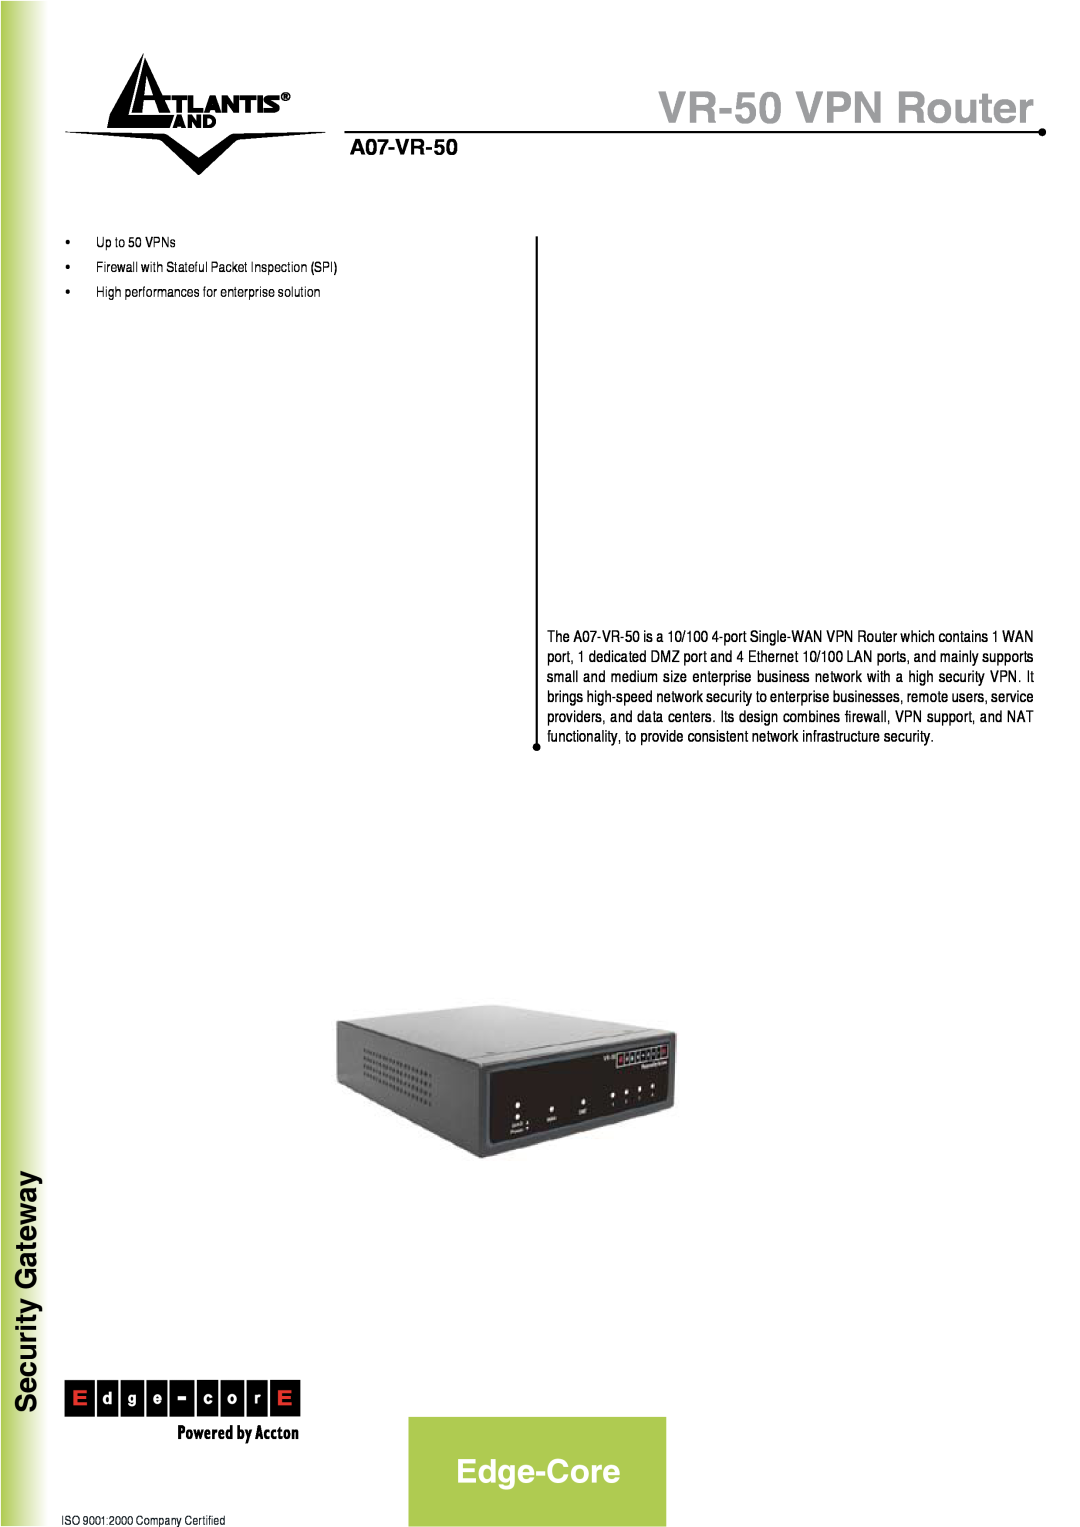 Atlantis Land A07-VR-50 user service VR-50 VPN Router, Edge-Core, Security Gateway, ISO 90012000 Company Certified 